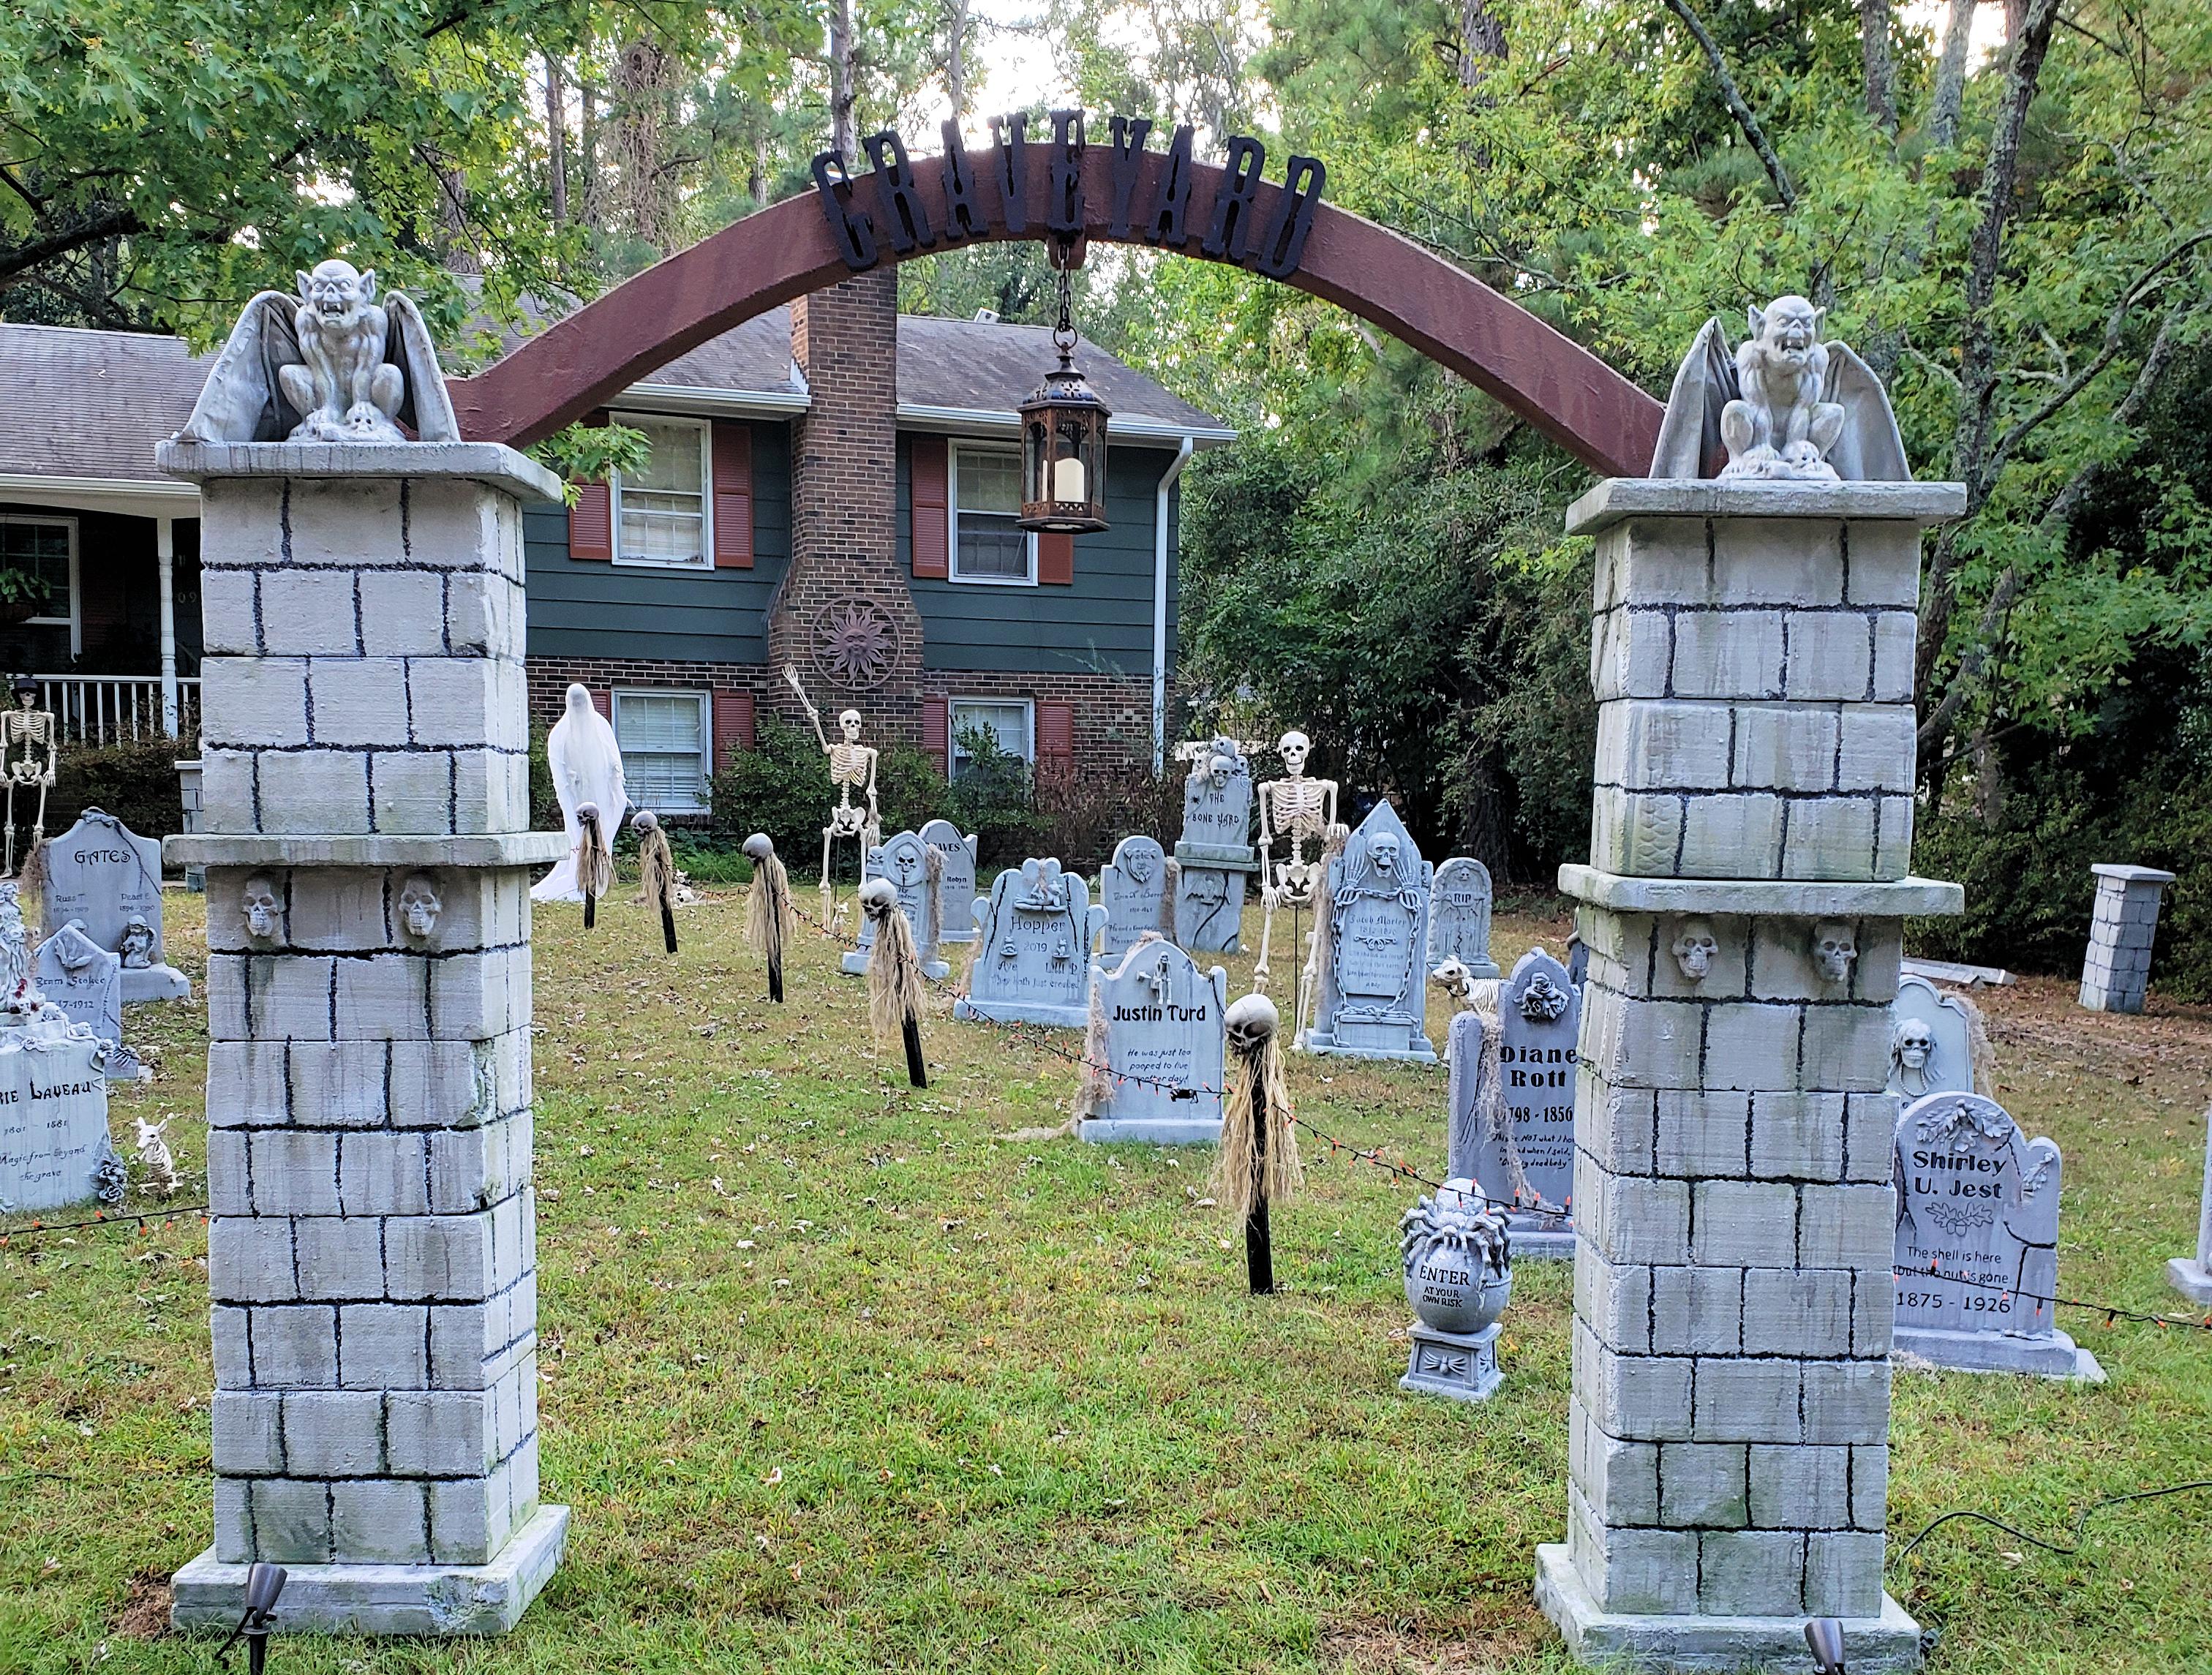 WHERE TO FIND STYROFOAM BLOCKS FOR FREE! - For Halloween